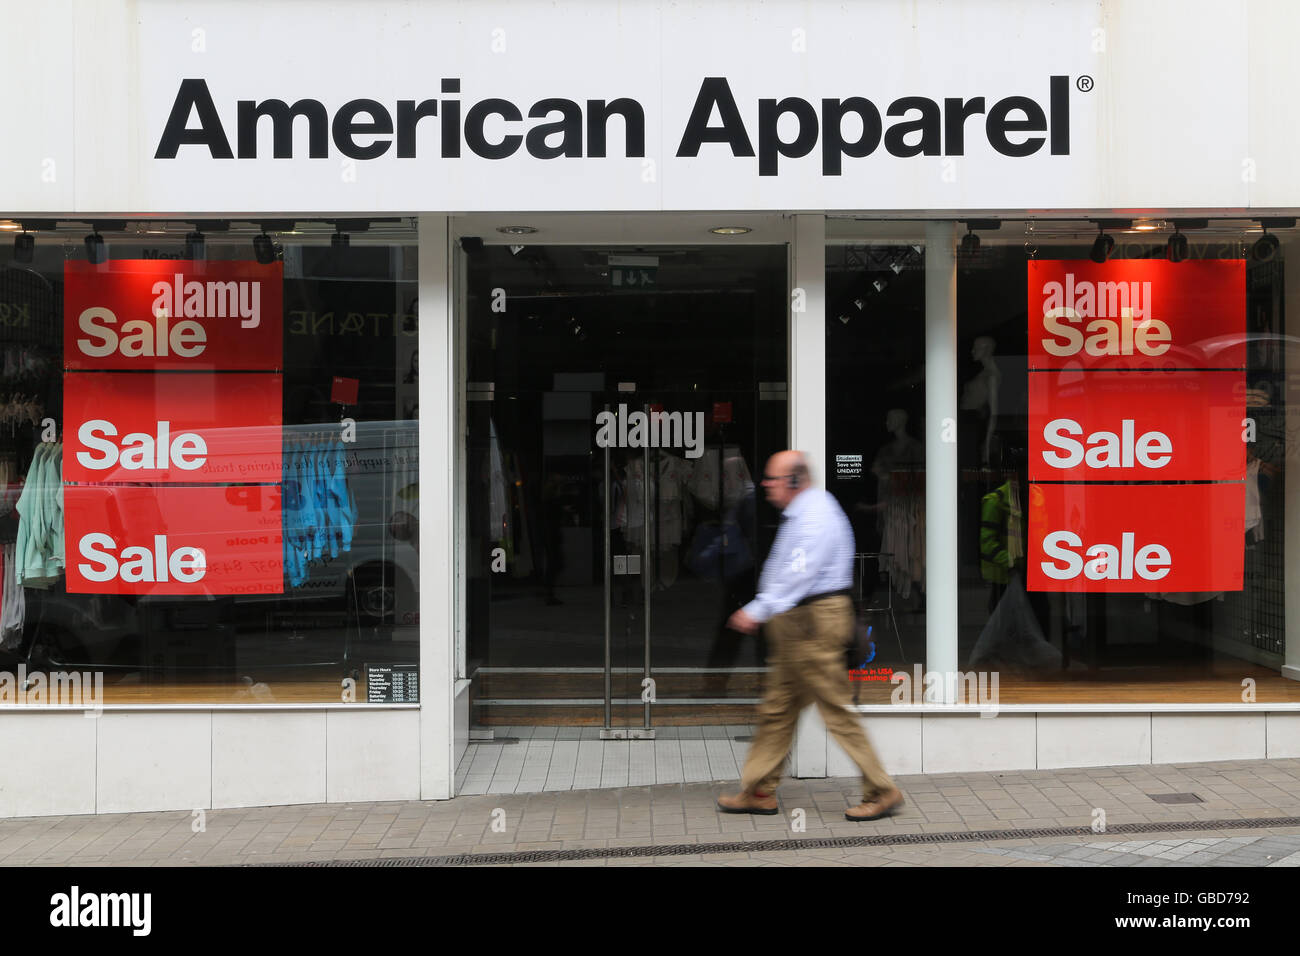 An American Apparel store in Leeds, West Yorkshire. Stock Photo